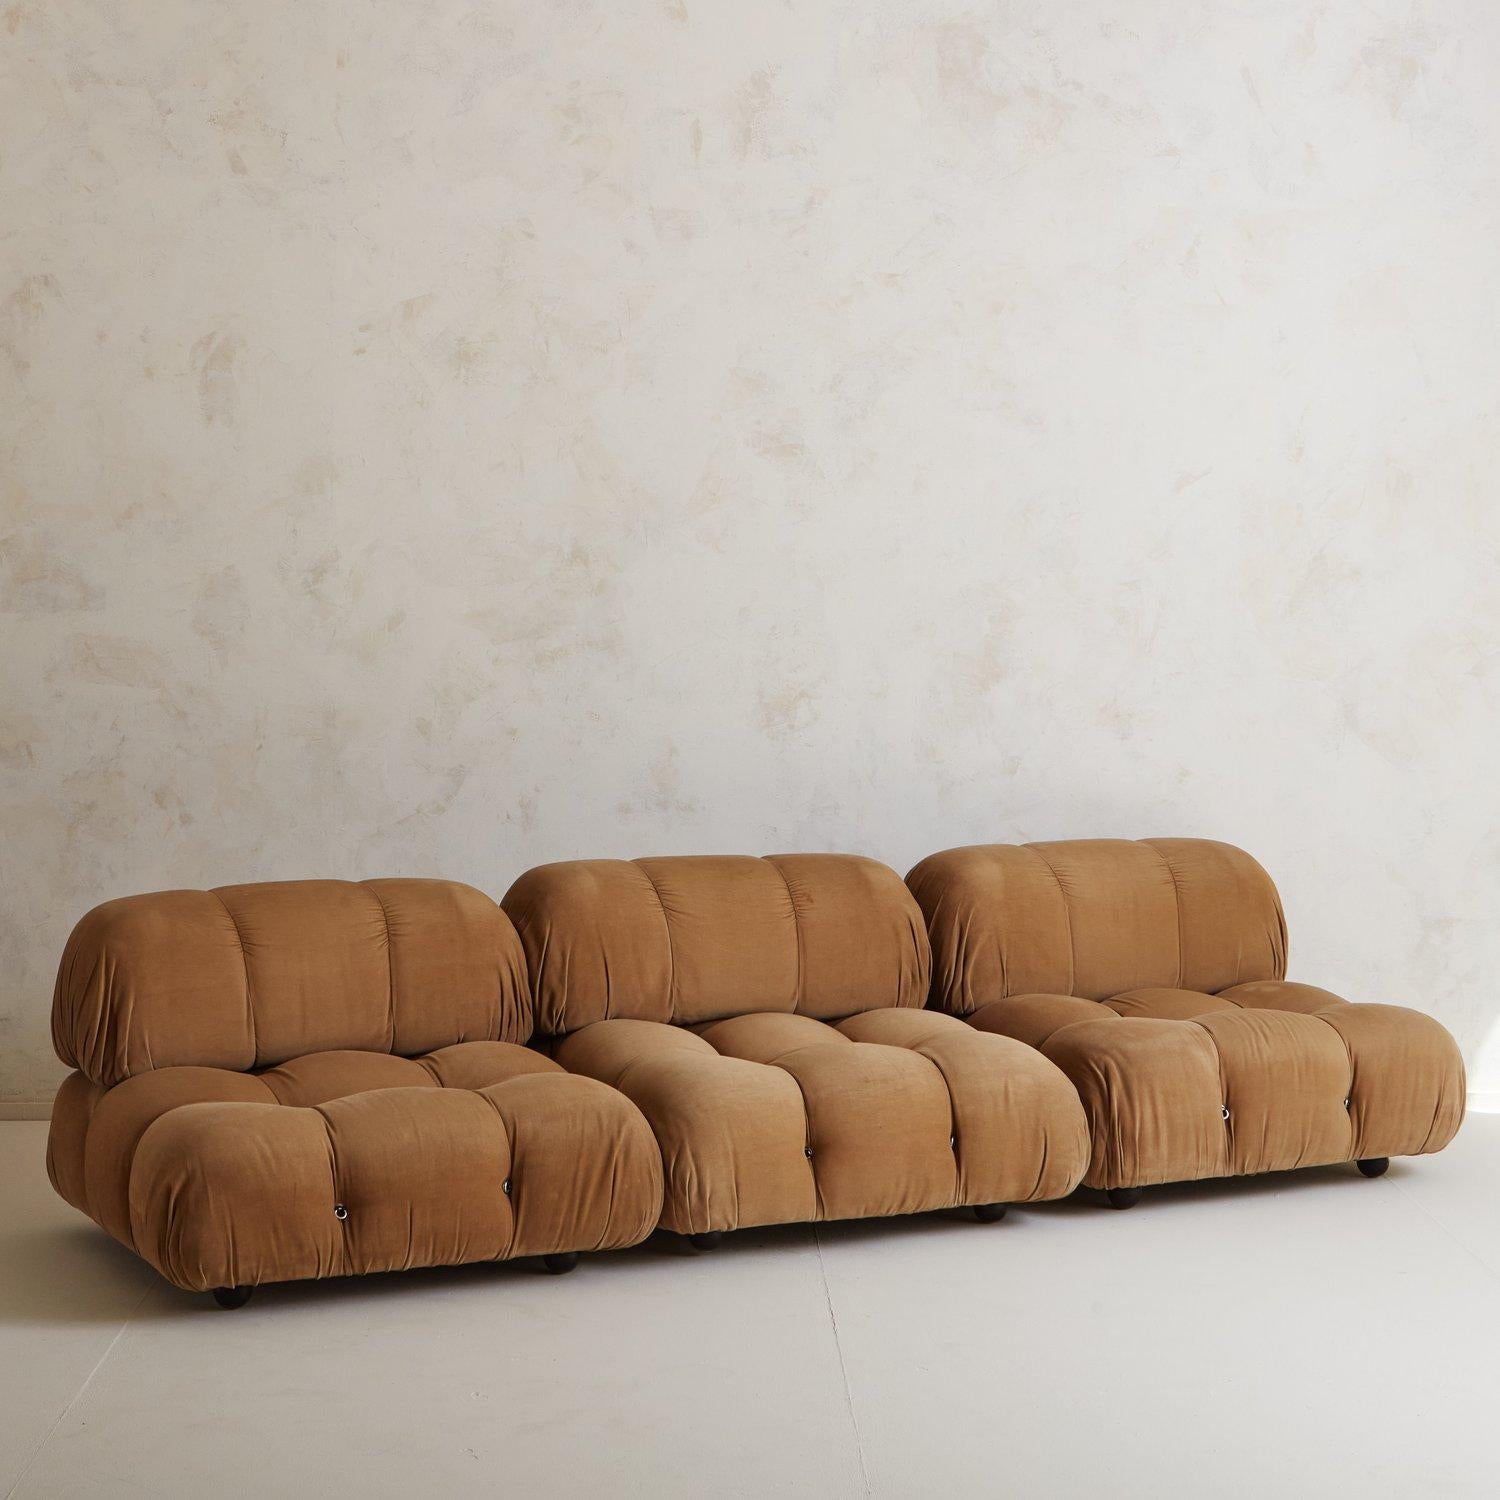 An iconic Mario Bellini modular Camaleonda sectional sofa for B & B Italia, 1970s. This sectional includes three full size sections in its original taupe fabric. The sectional elements of this sofa can be separated and used as individual chairs. The